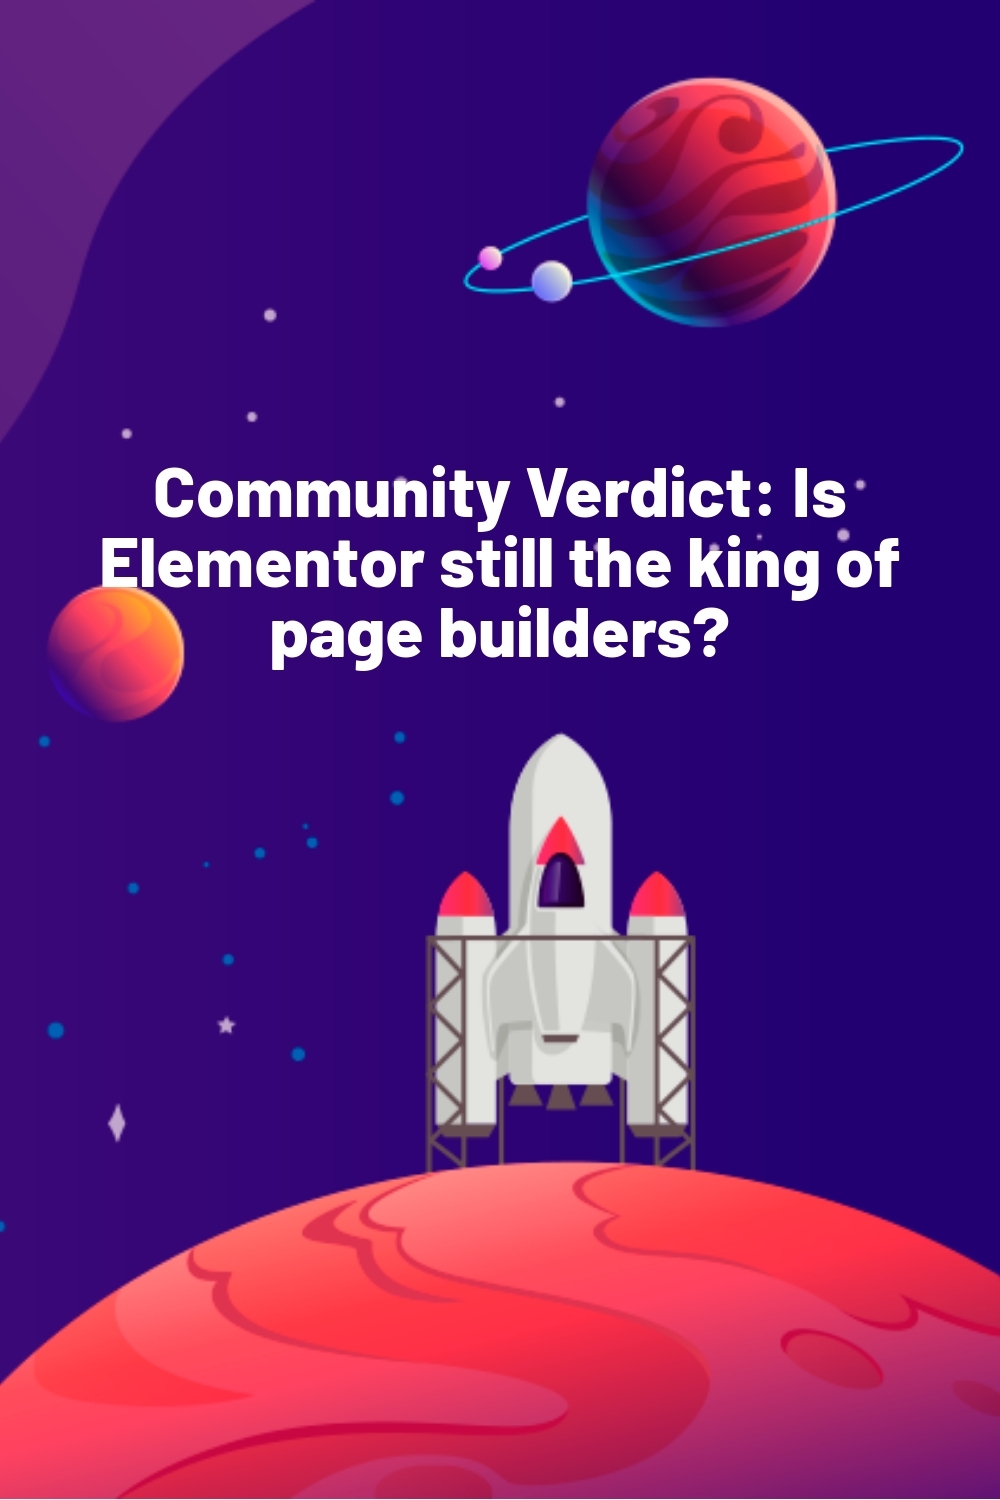 Community Verdict: Is Elementor still the king of page builders?